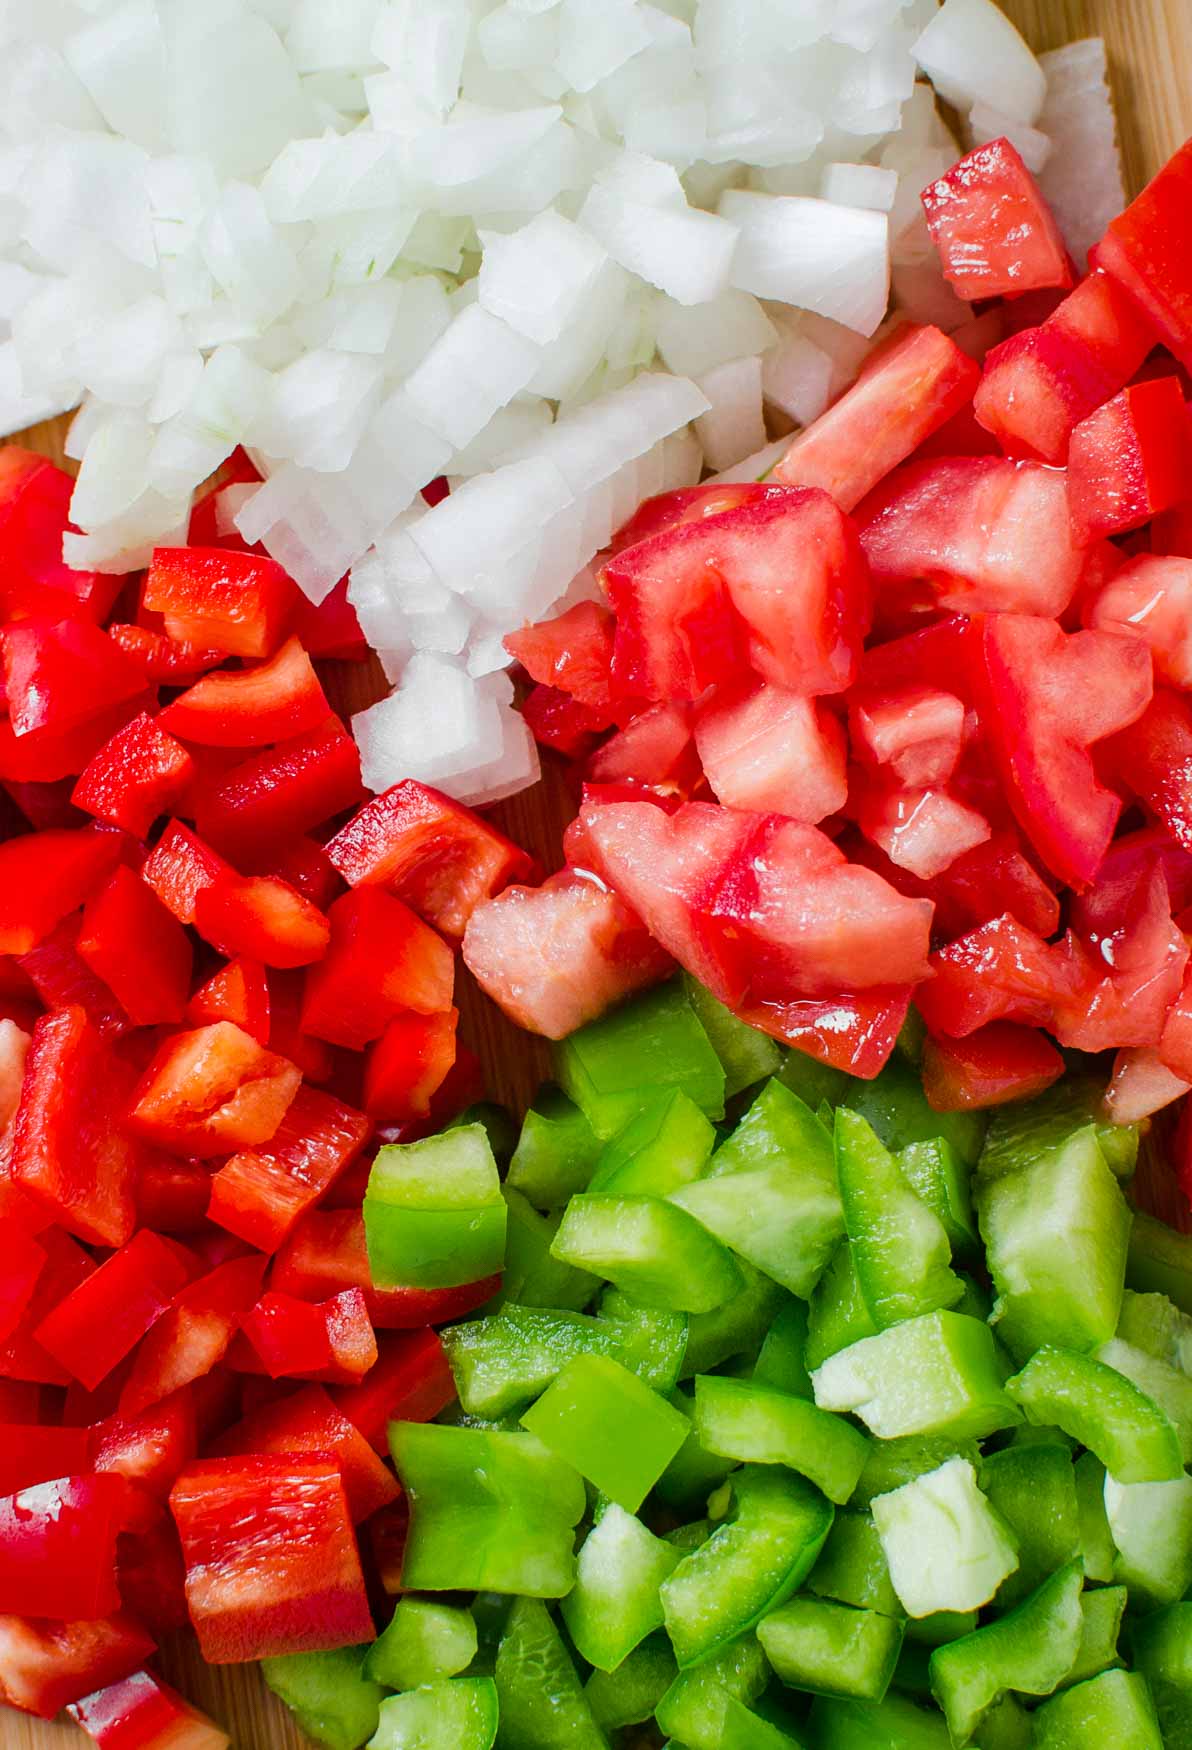 Diced red and green pepper, onion and tomato for making black bean soup